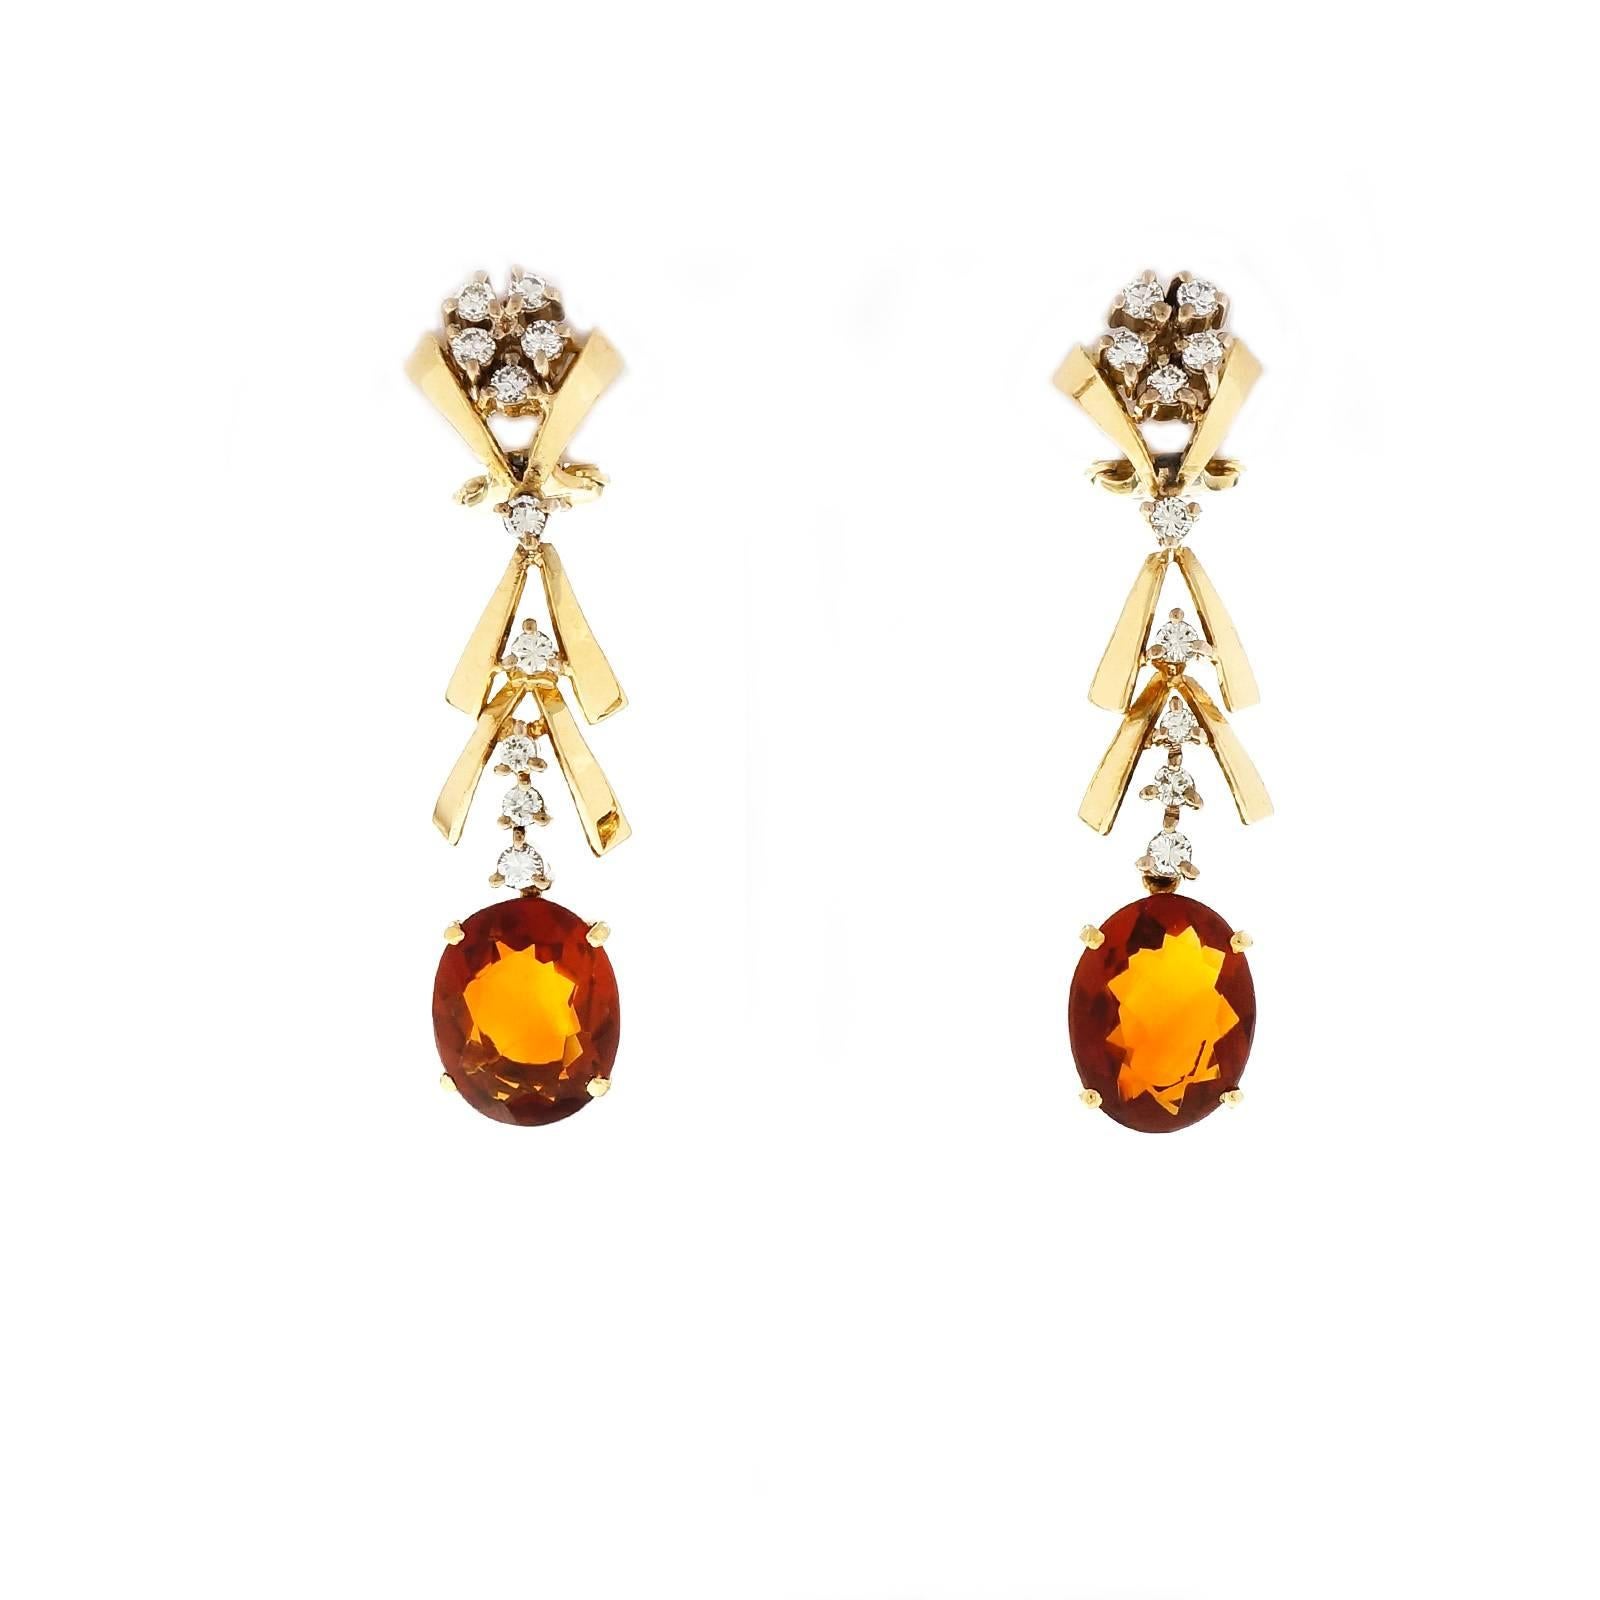 Wonderful 1950 to 1960 vintage 18k white gold and yellow gold dangle earrings with bright sparkly diamonds and fine orange Citrines.

2 oval Madera orange Citrine, 10.73 x 8.88 x 3.97mm
20 round full cut diamonds, approx. total weight .60cts, G –